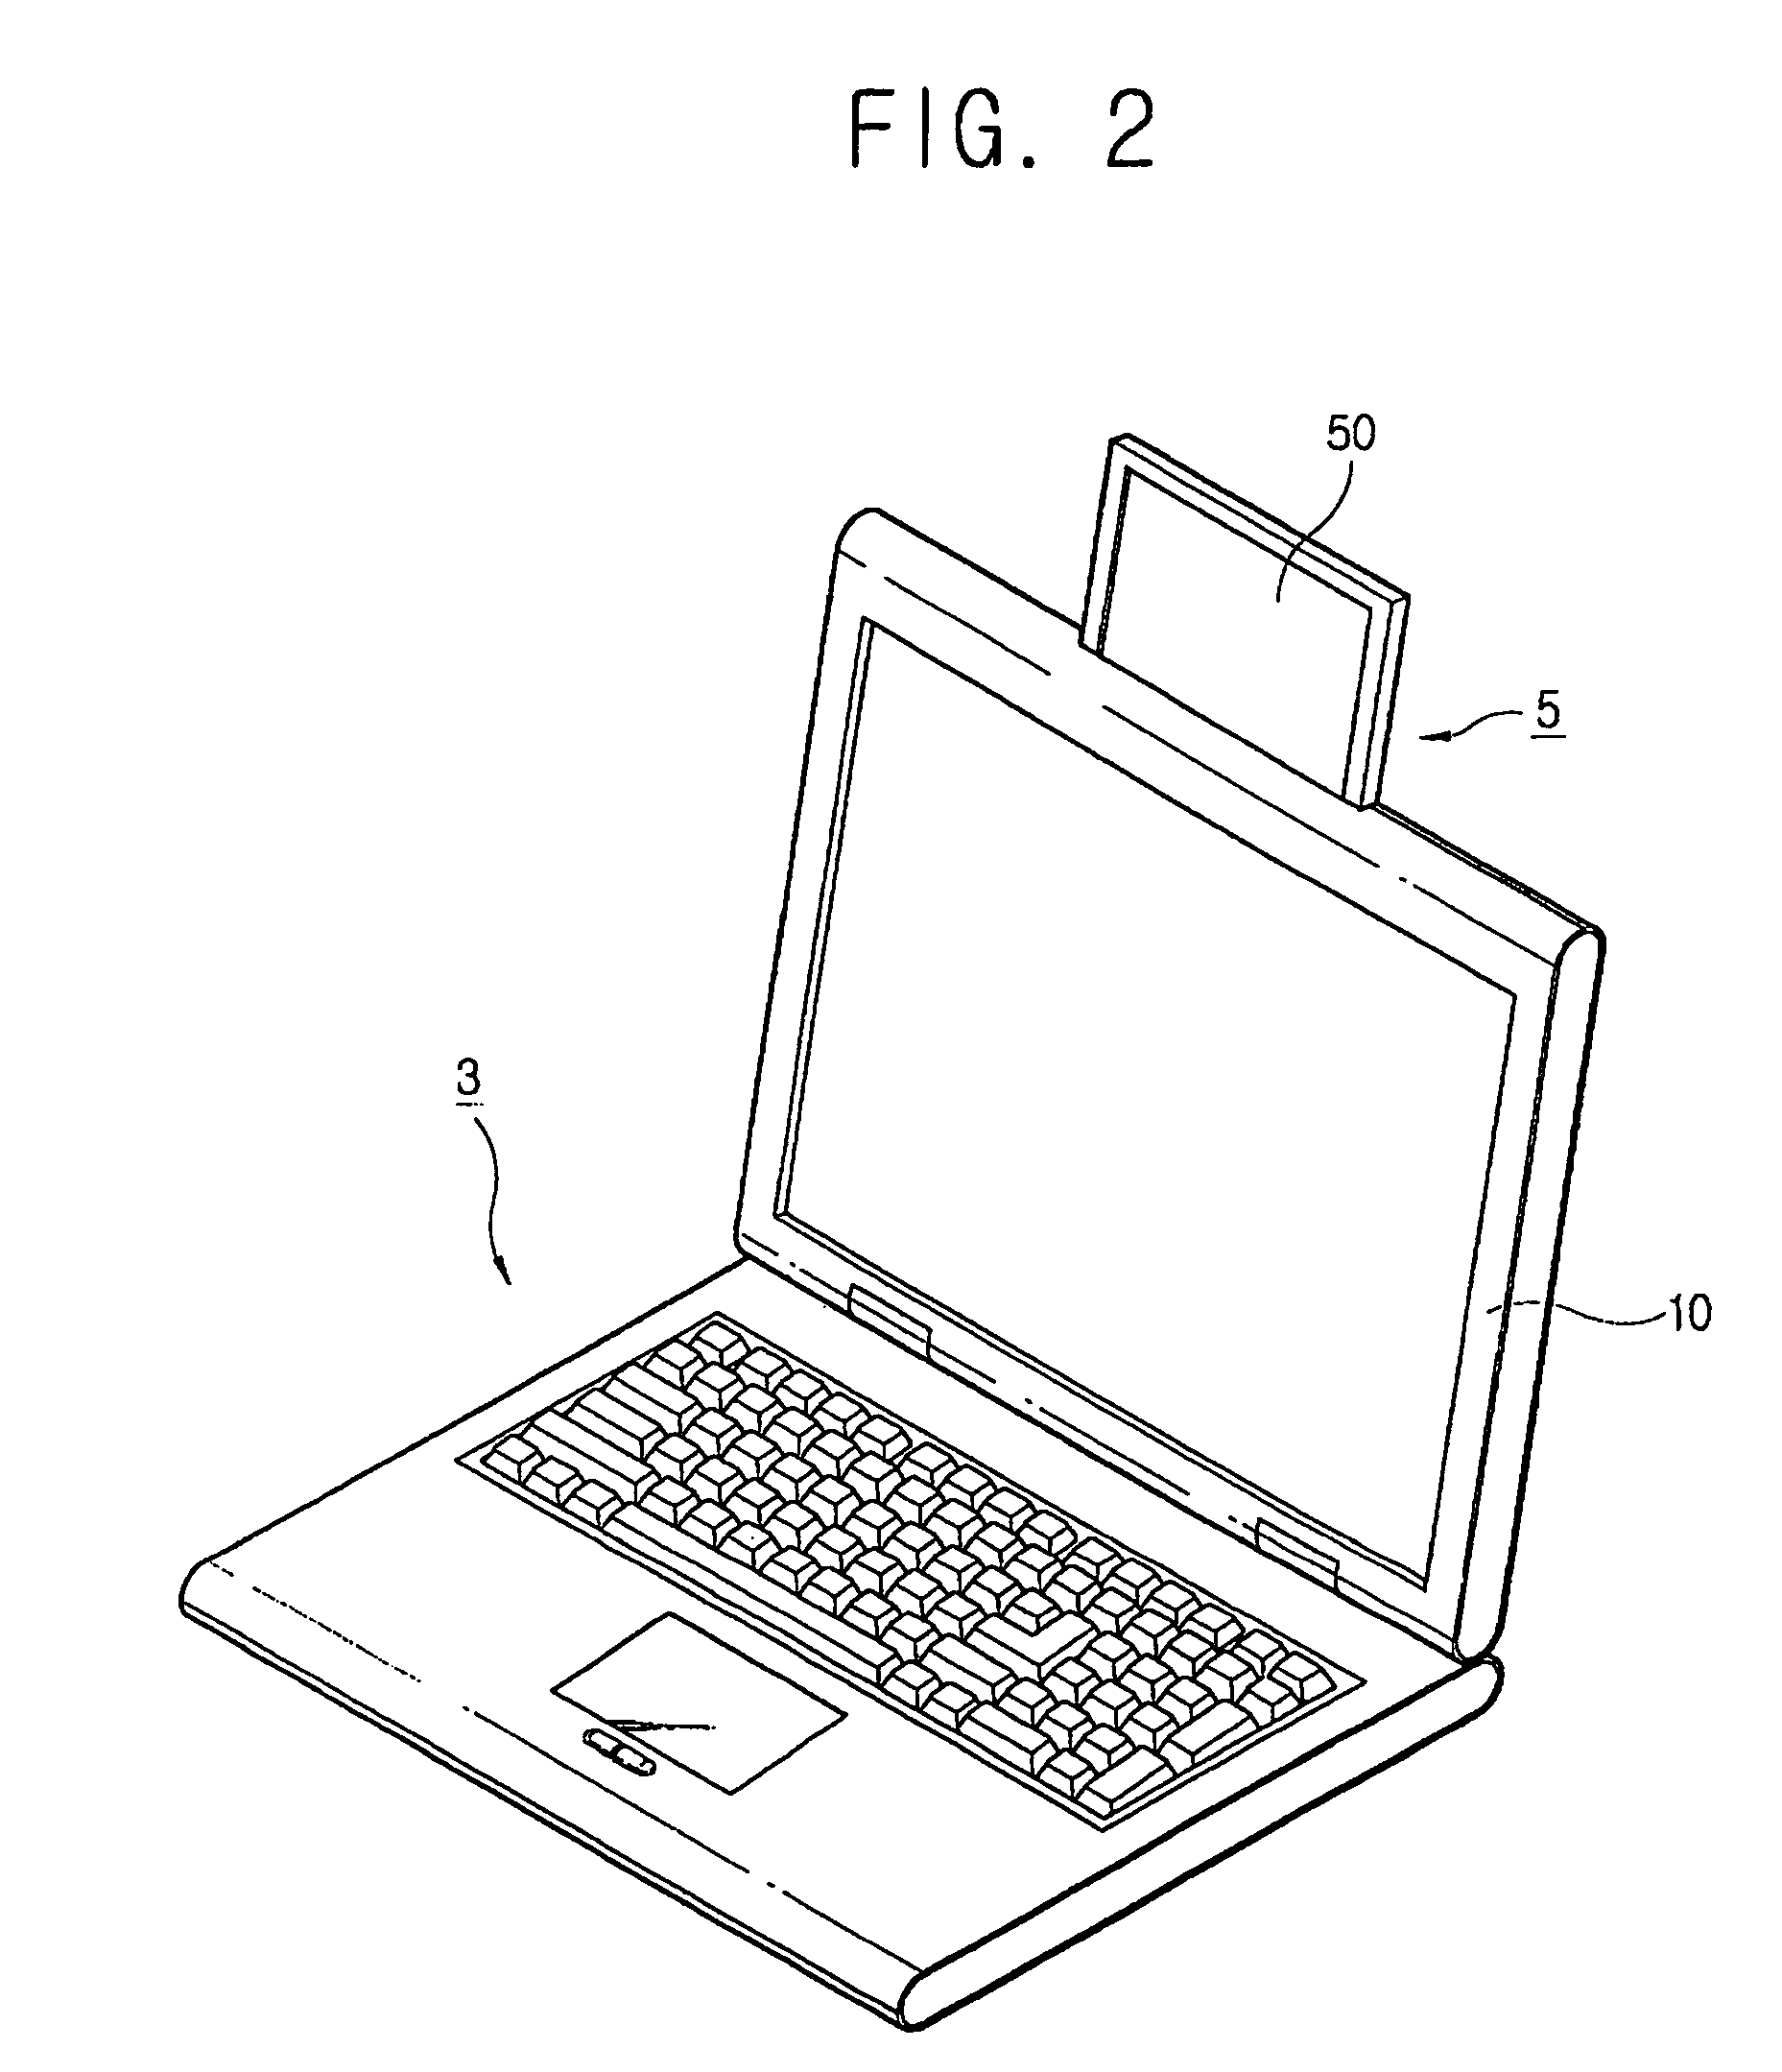 Method of controlling power to an auxiliary system comprising a display part and a wireless sending/receiving part connected to a portable computer through a mounting part